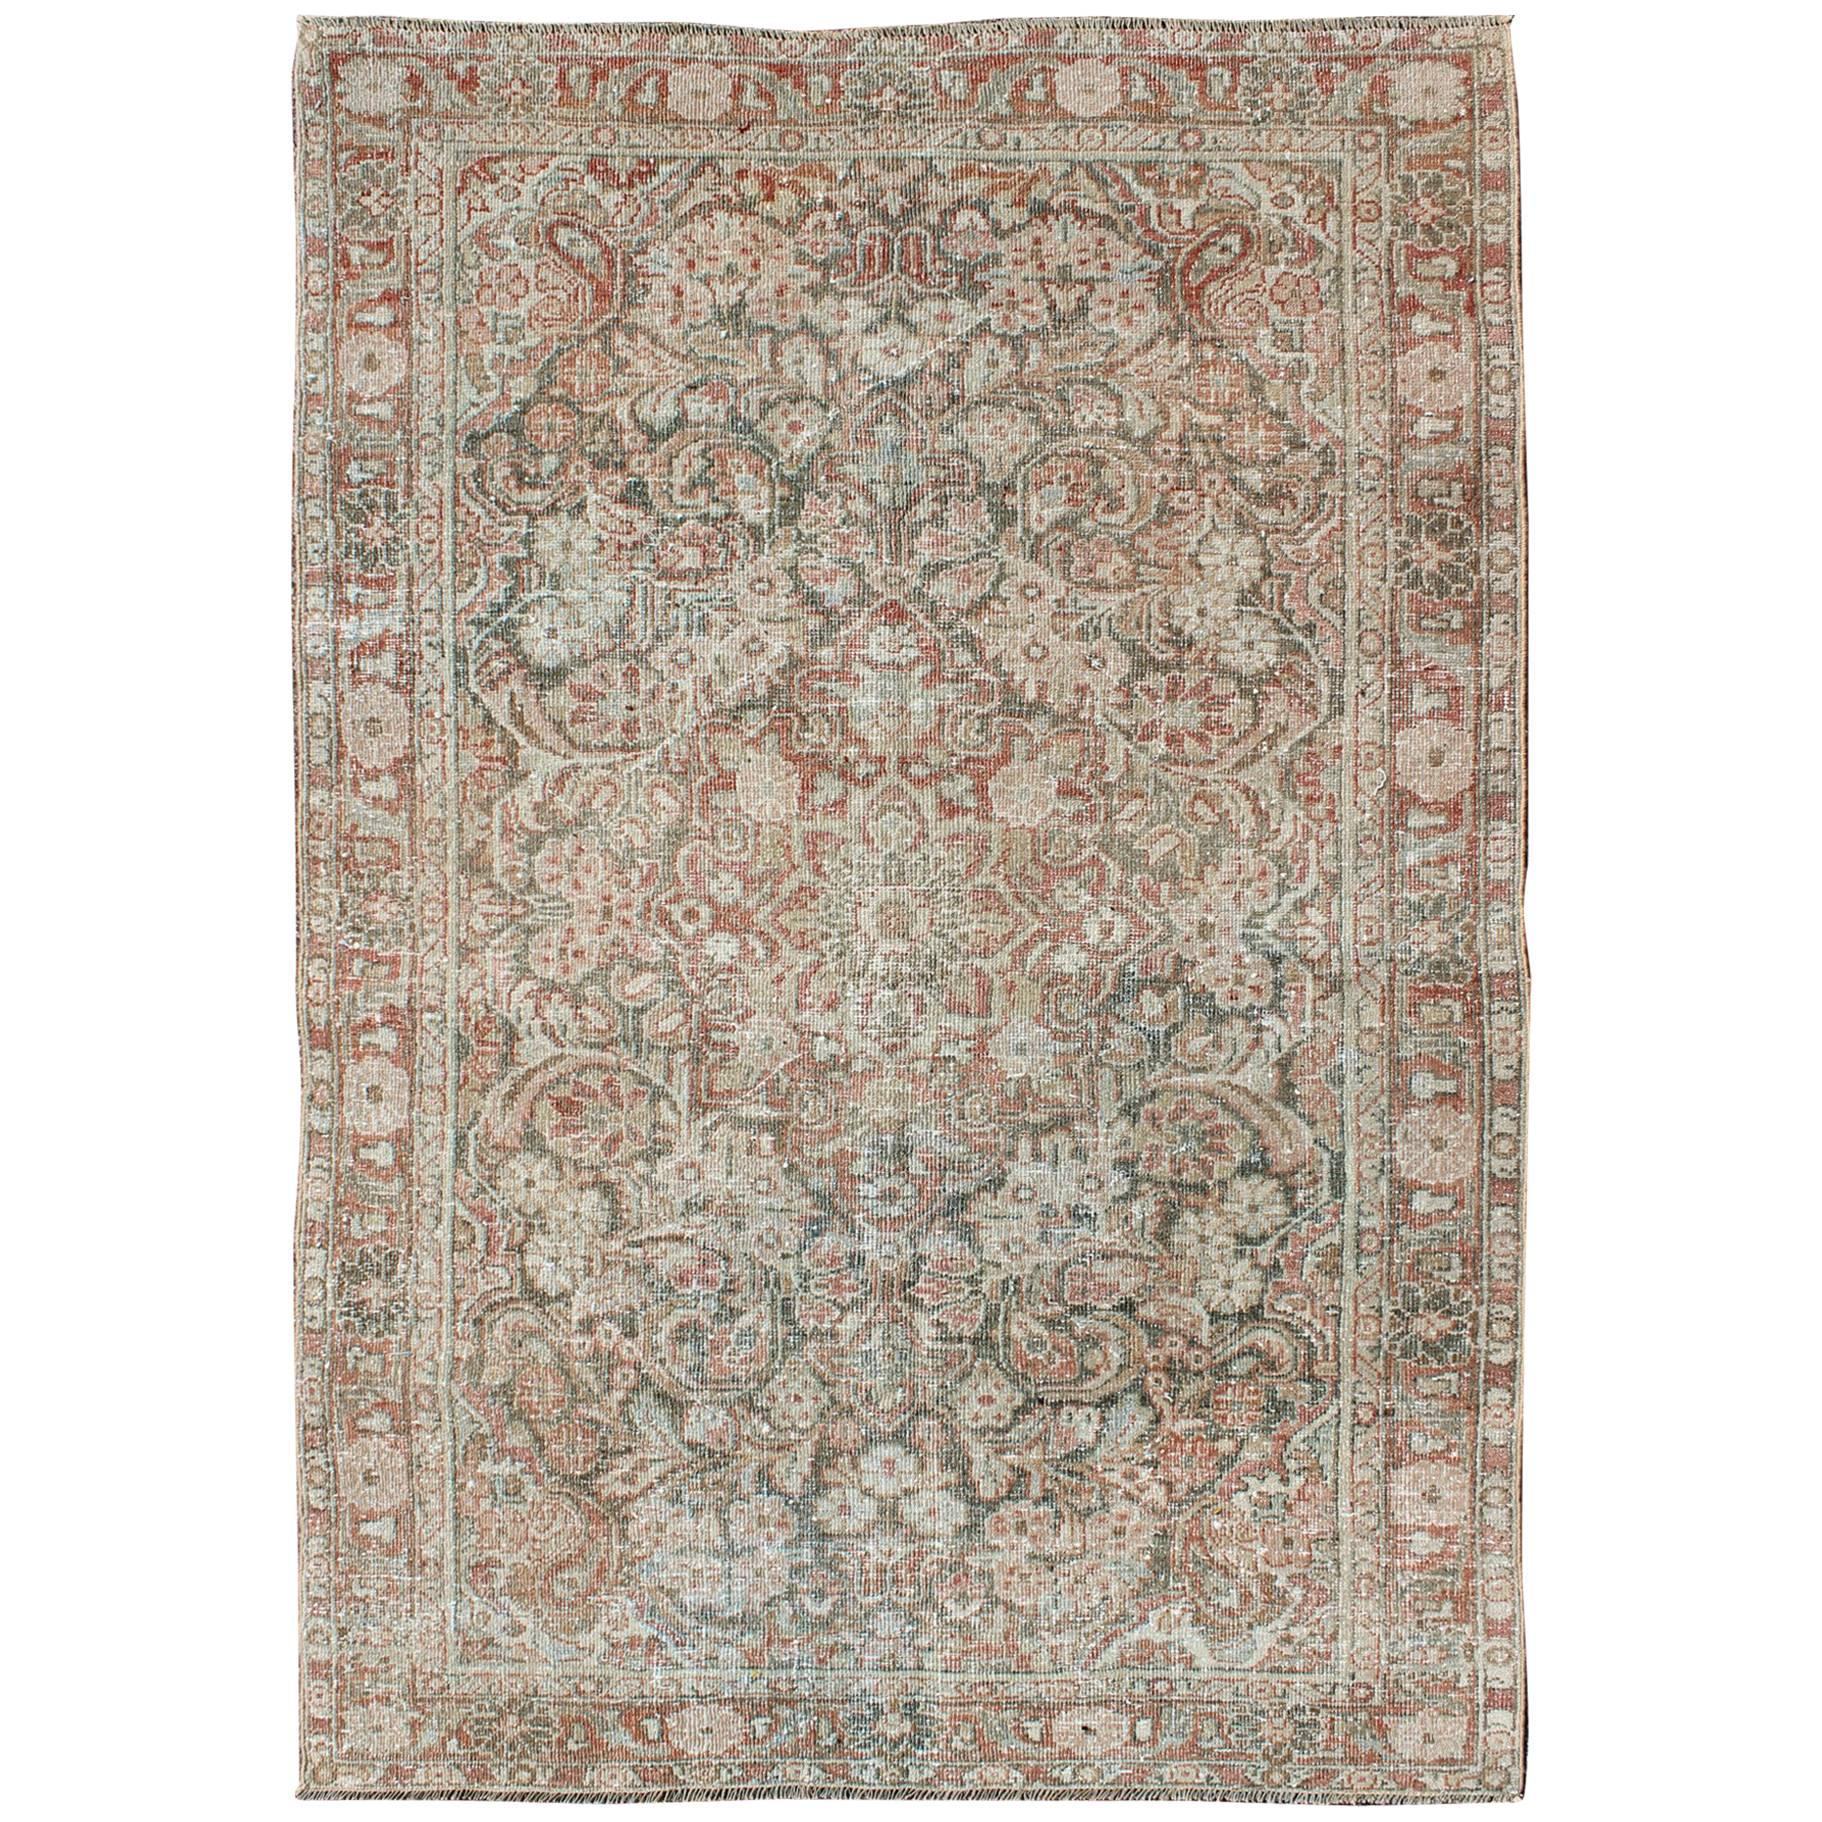 Antique Persian Mahal Carpet with Flowers and Palmettes in Faint Green